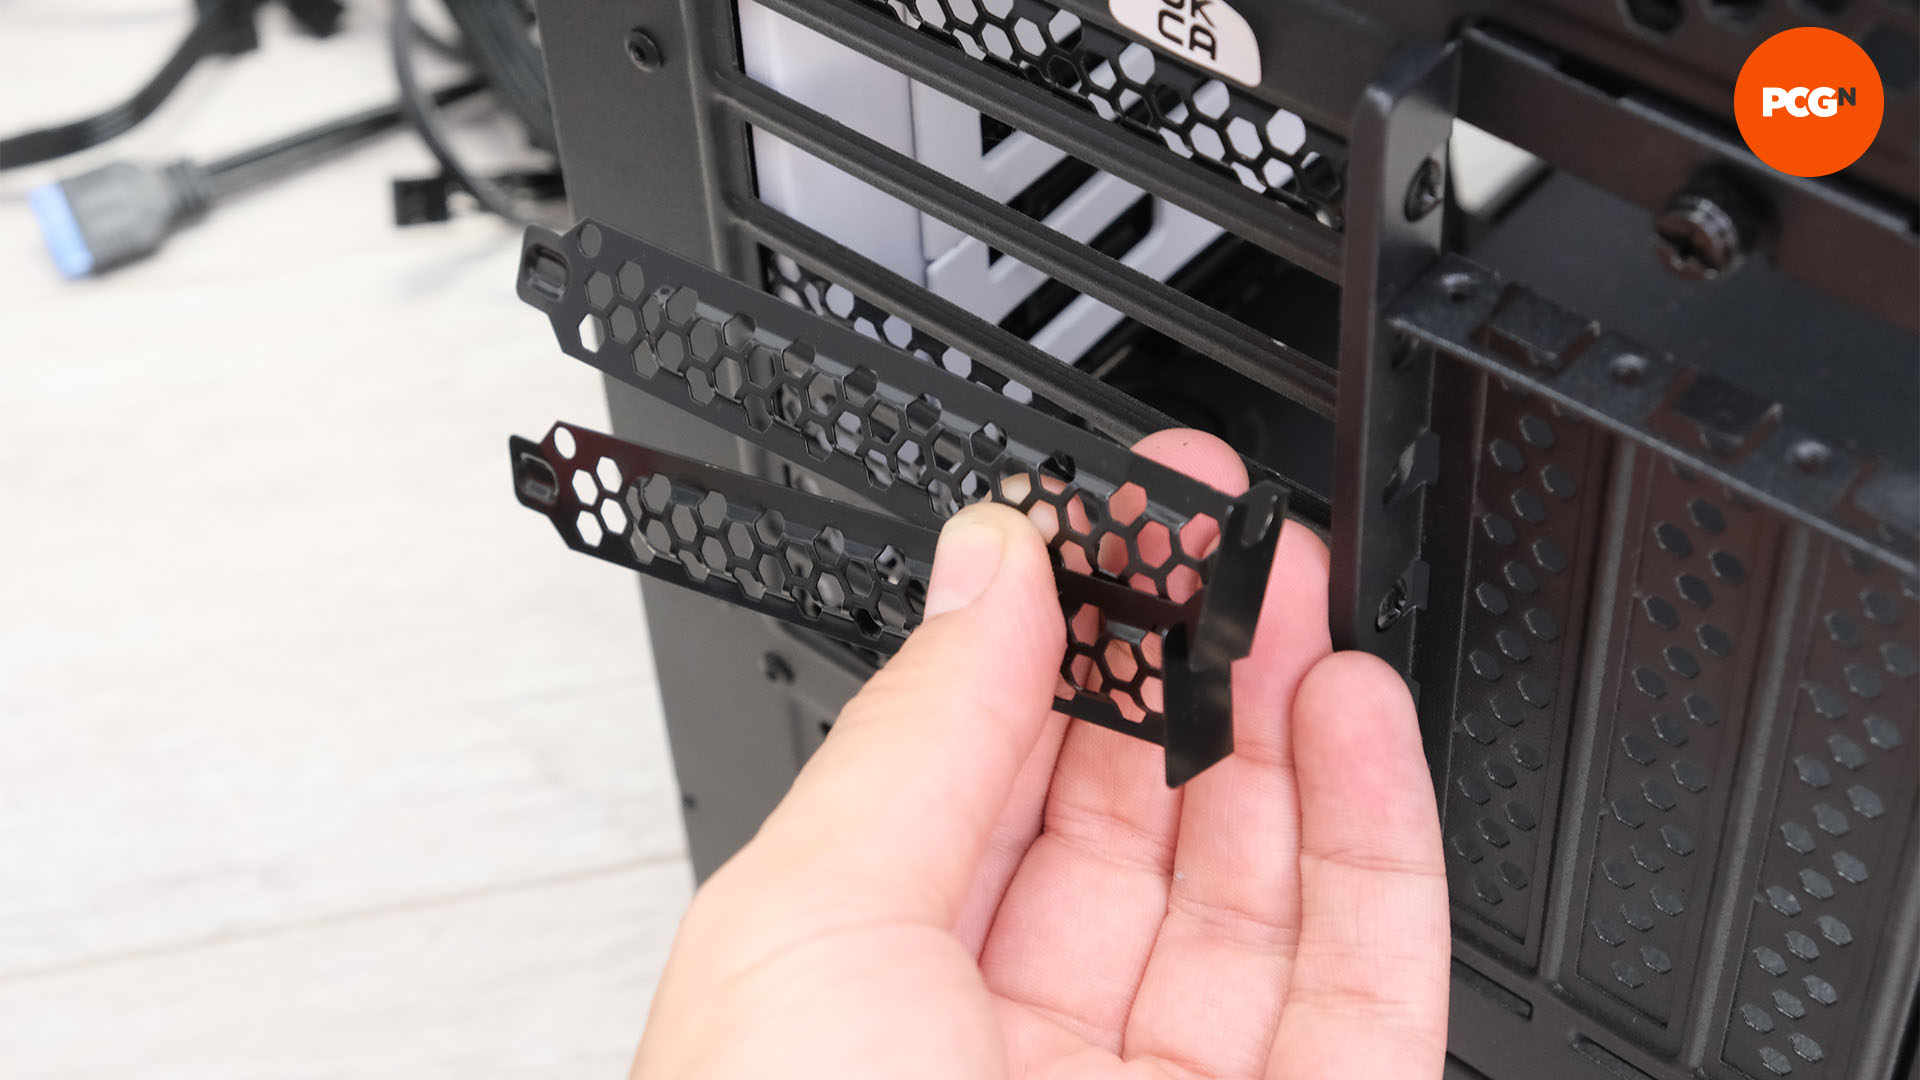 How to build a gaming PC: Remove expansion slot covers